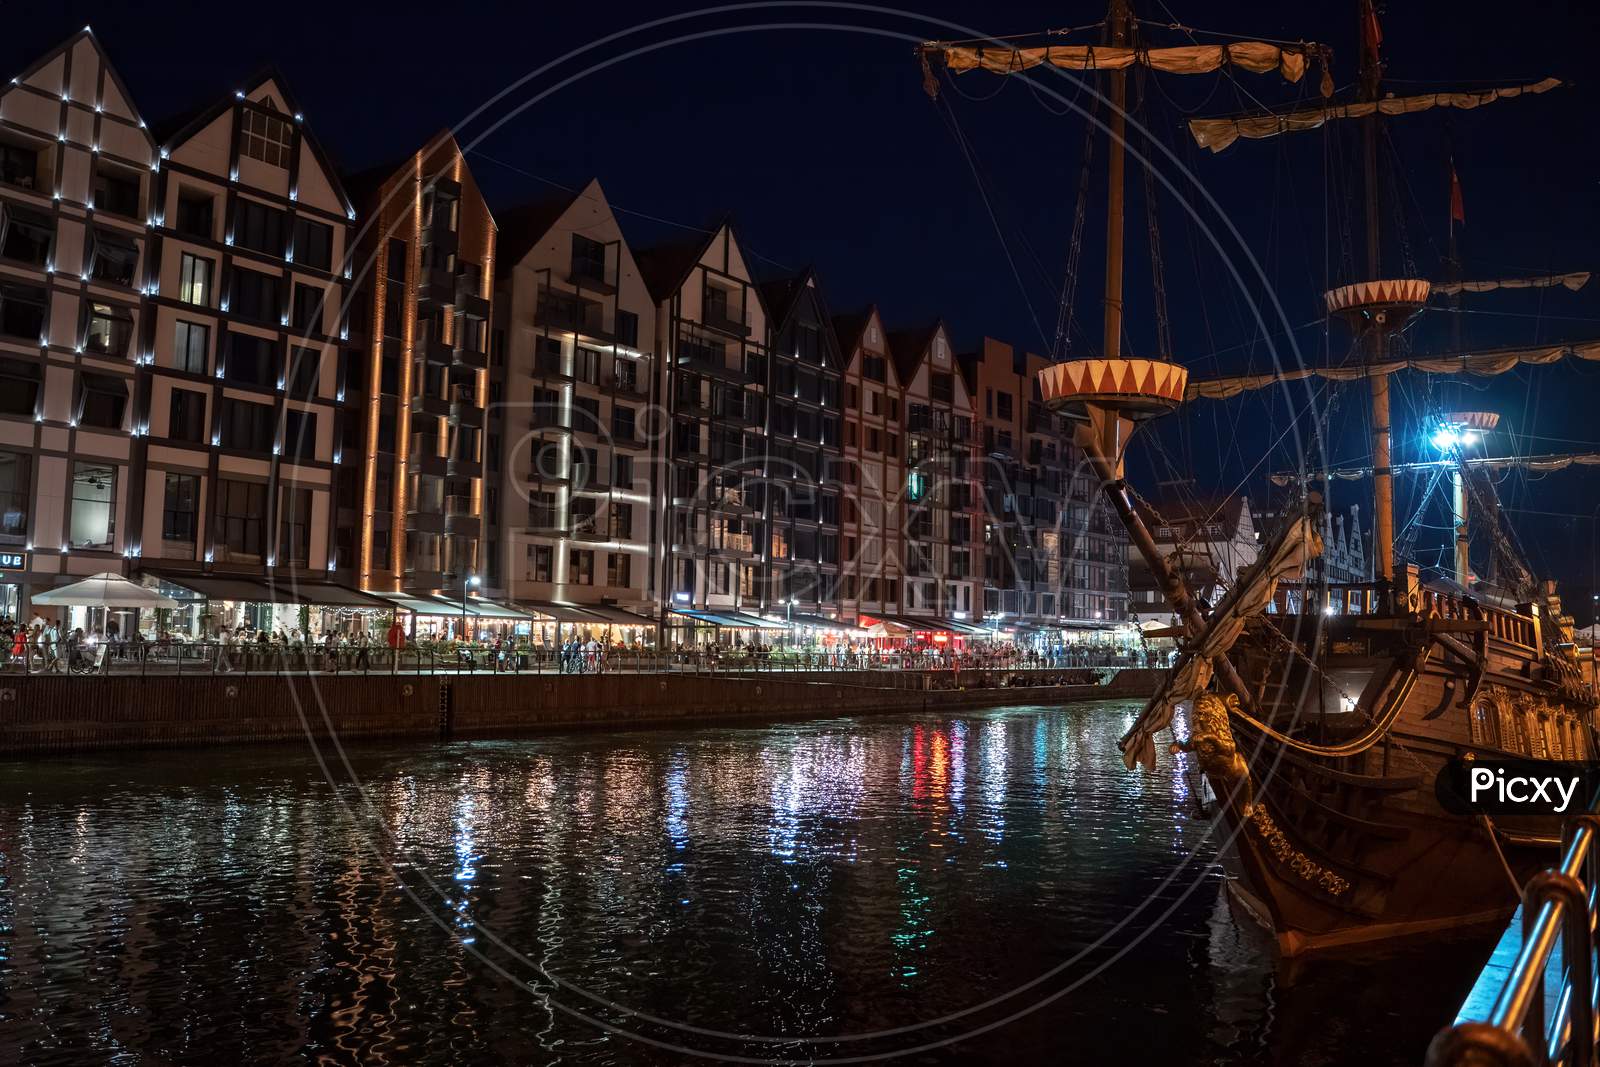 Gdansk, North Poland - August 13, 2020: Night Photograph Of Medieval Style Polish Architecture And A Pirate Ship Over Motlawa River Located In The Old Town Near Baltic Sea